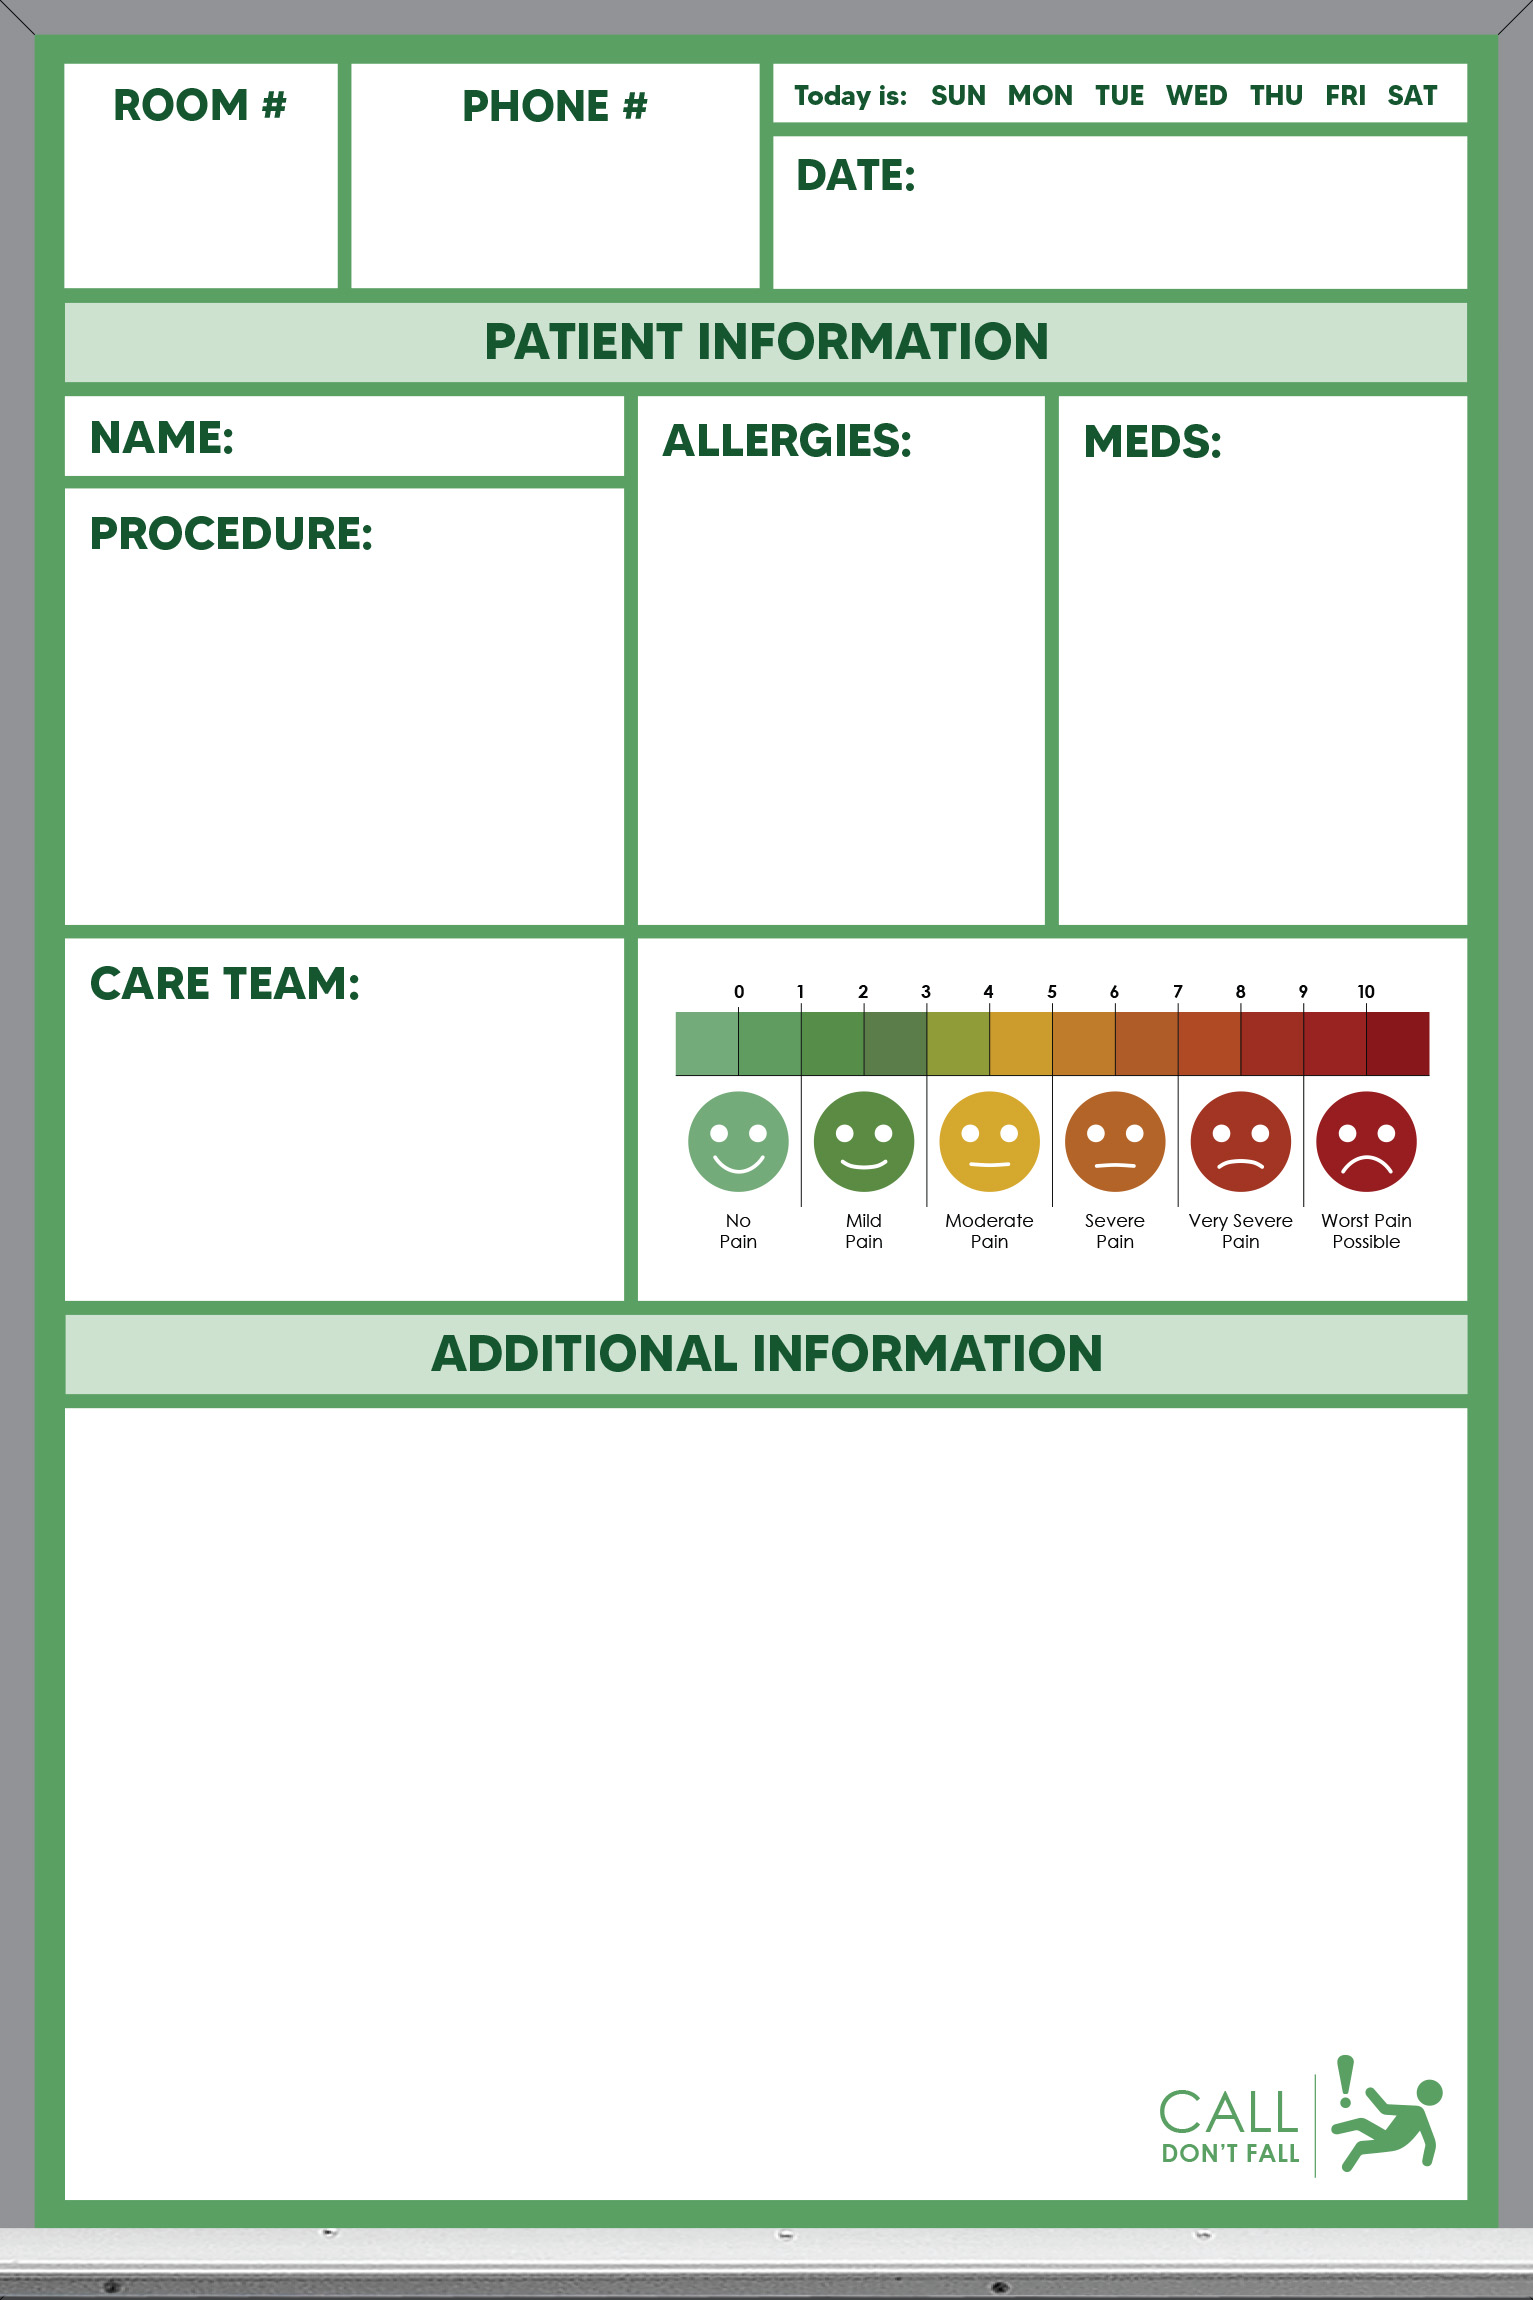 pre-printed patient care whiteboard, green color, plain, 3x2